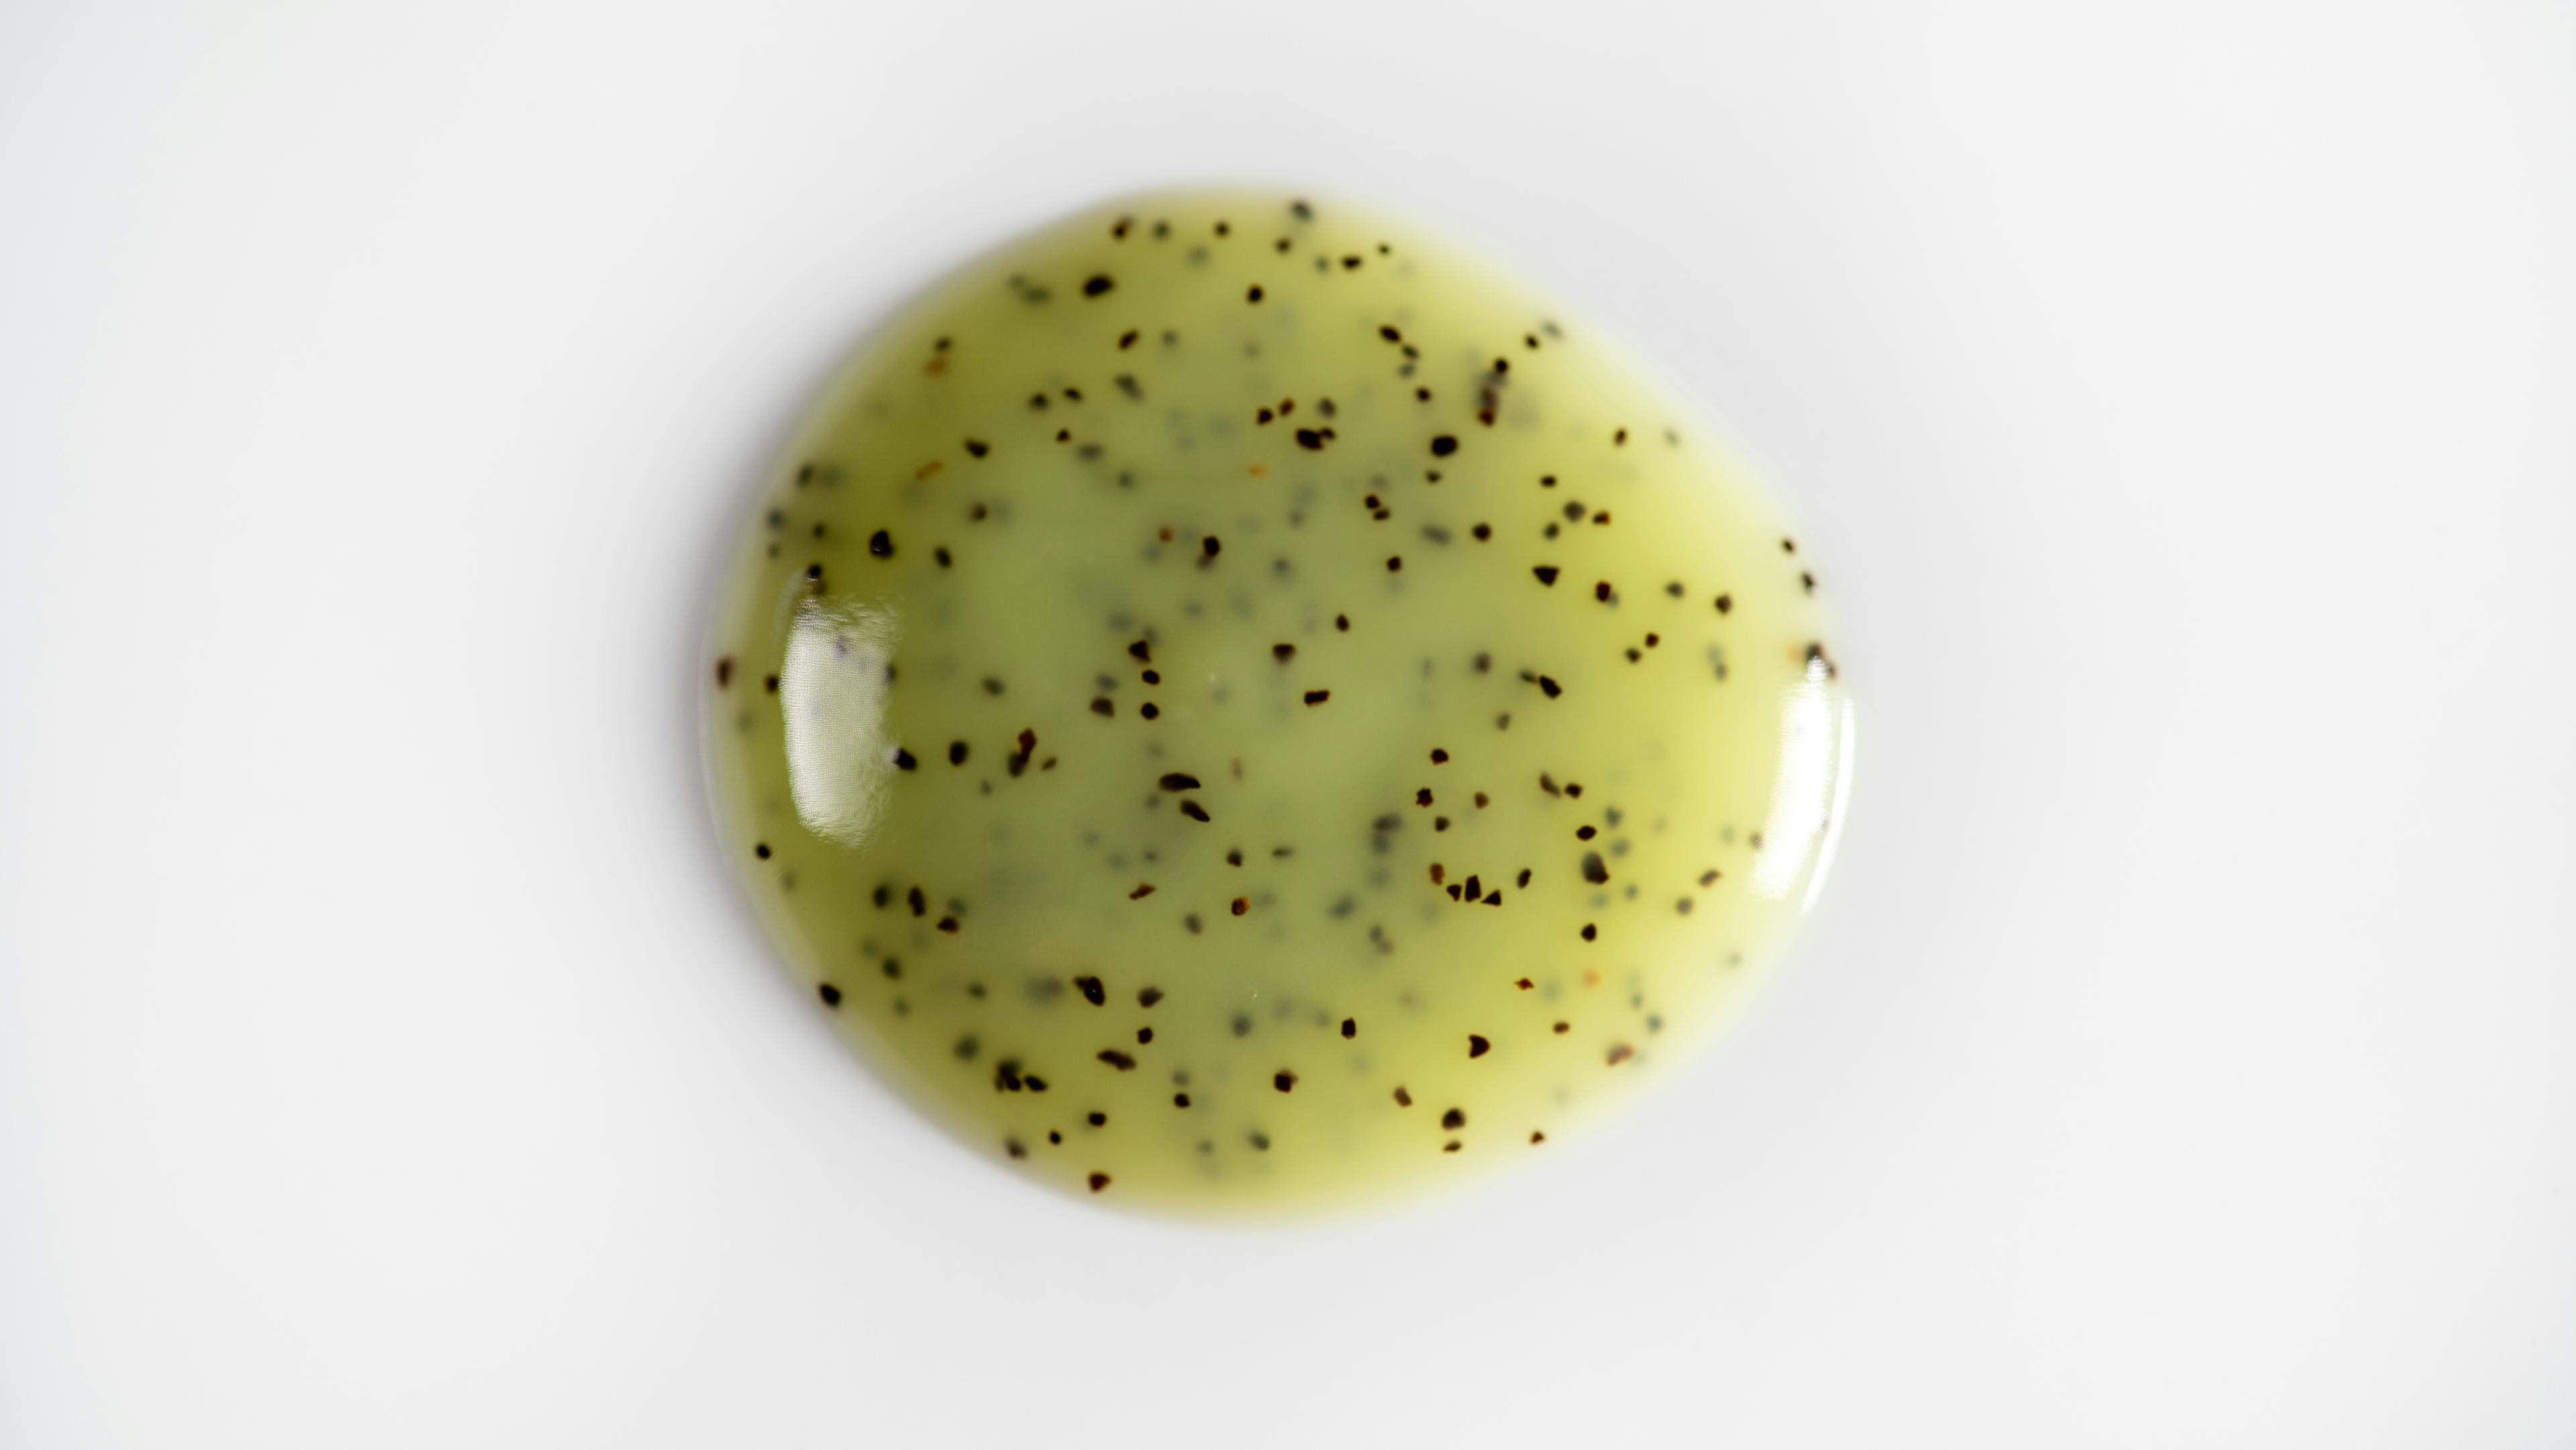 Green gel with black particles on a white background